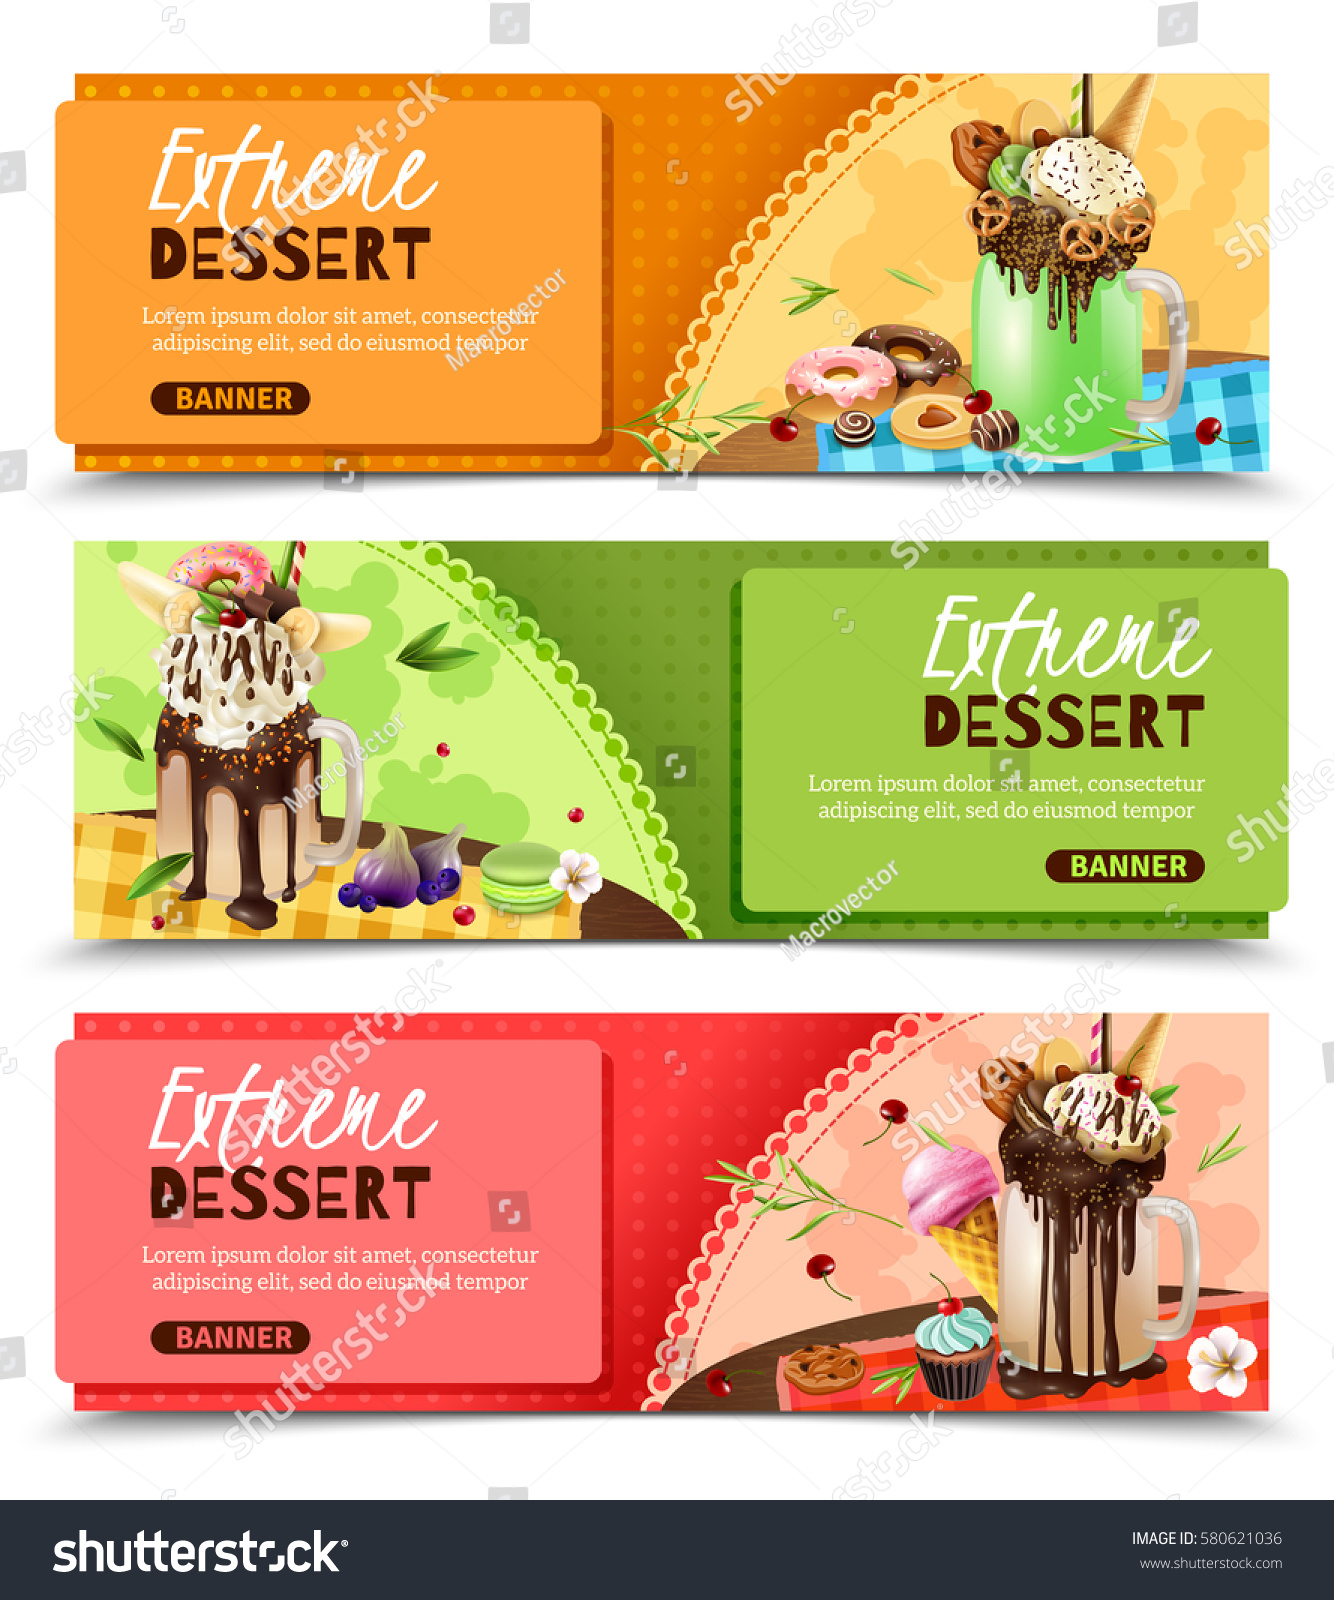 SVG of Super sweet rich extreme desserts recipes ideas 3 horizontal appetizing website page banners design isolated vector illustration  svg